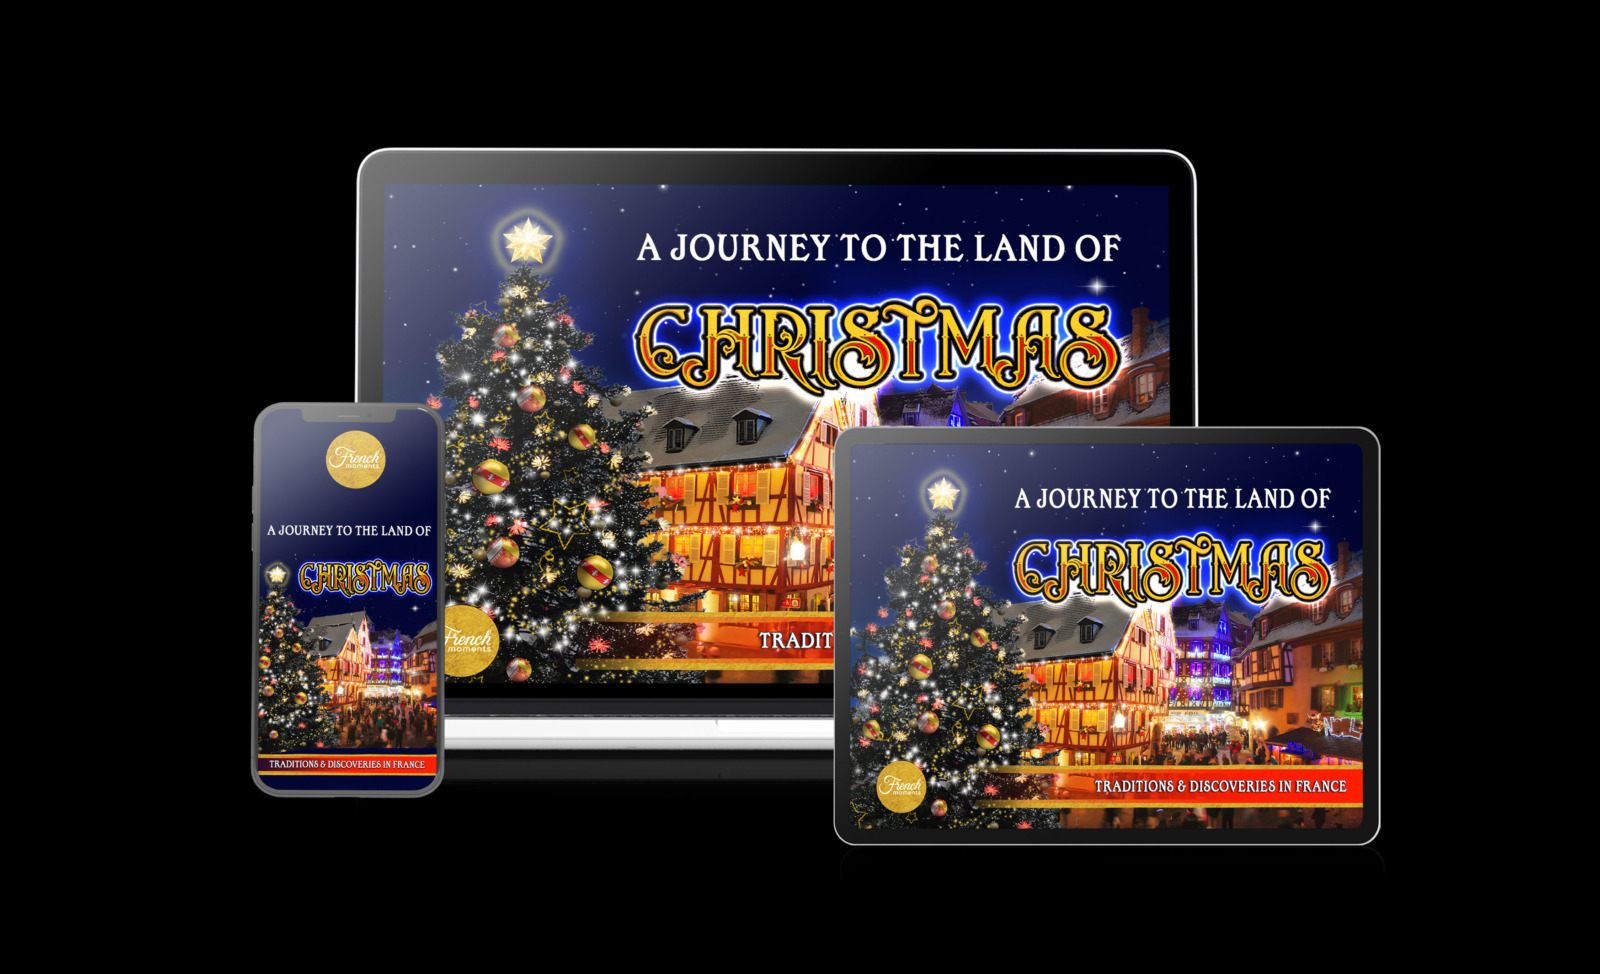 A Journey to the Land of Christmas